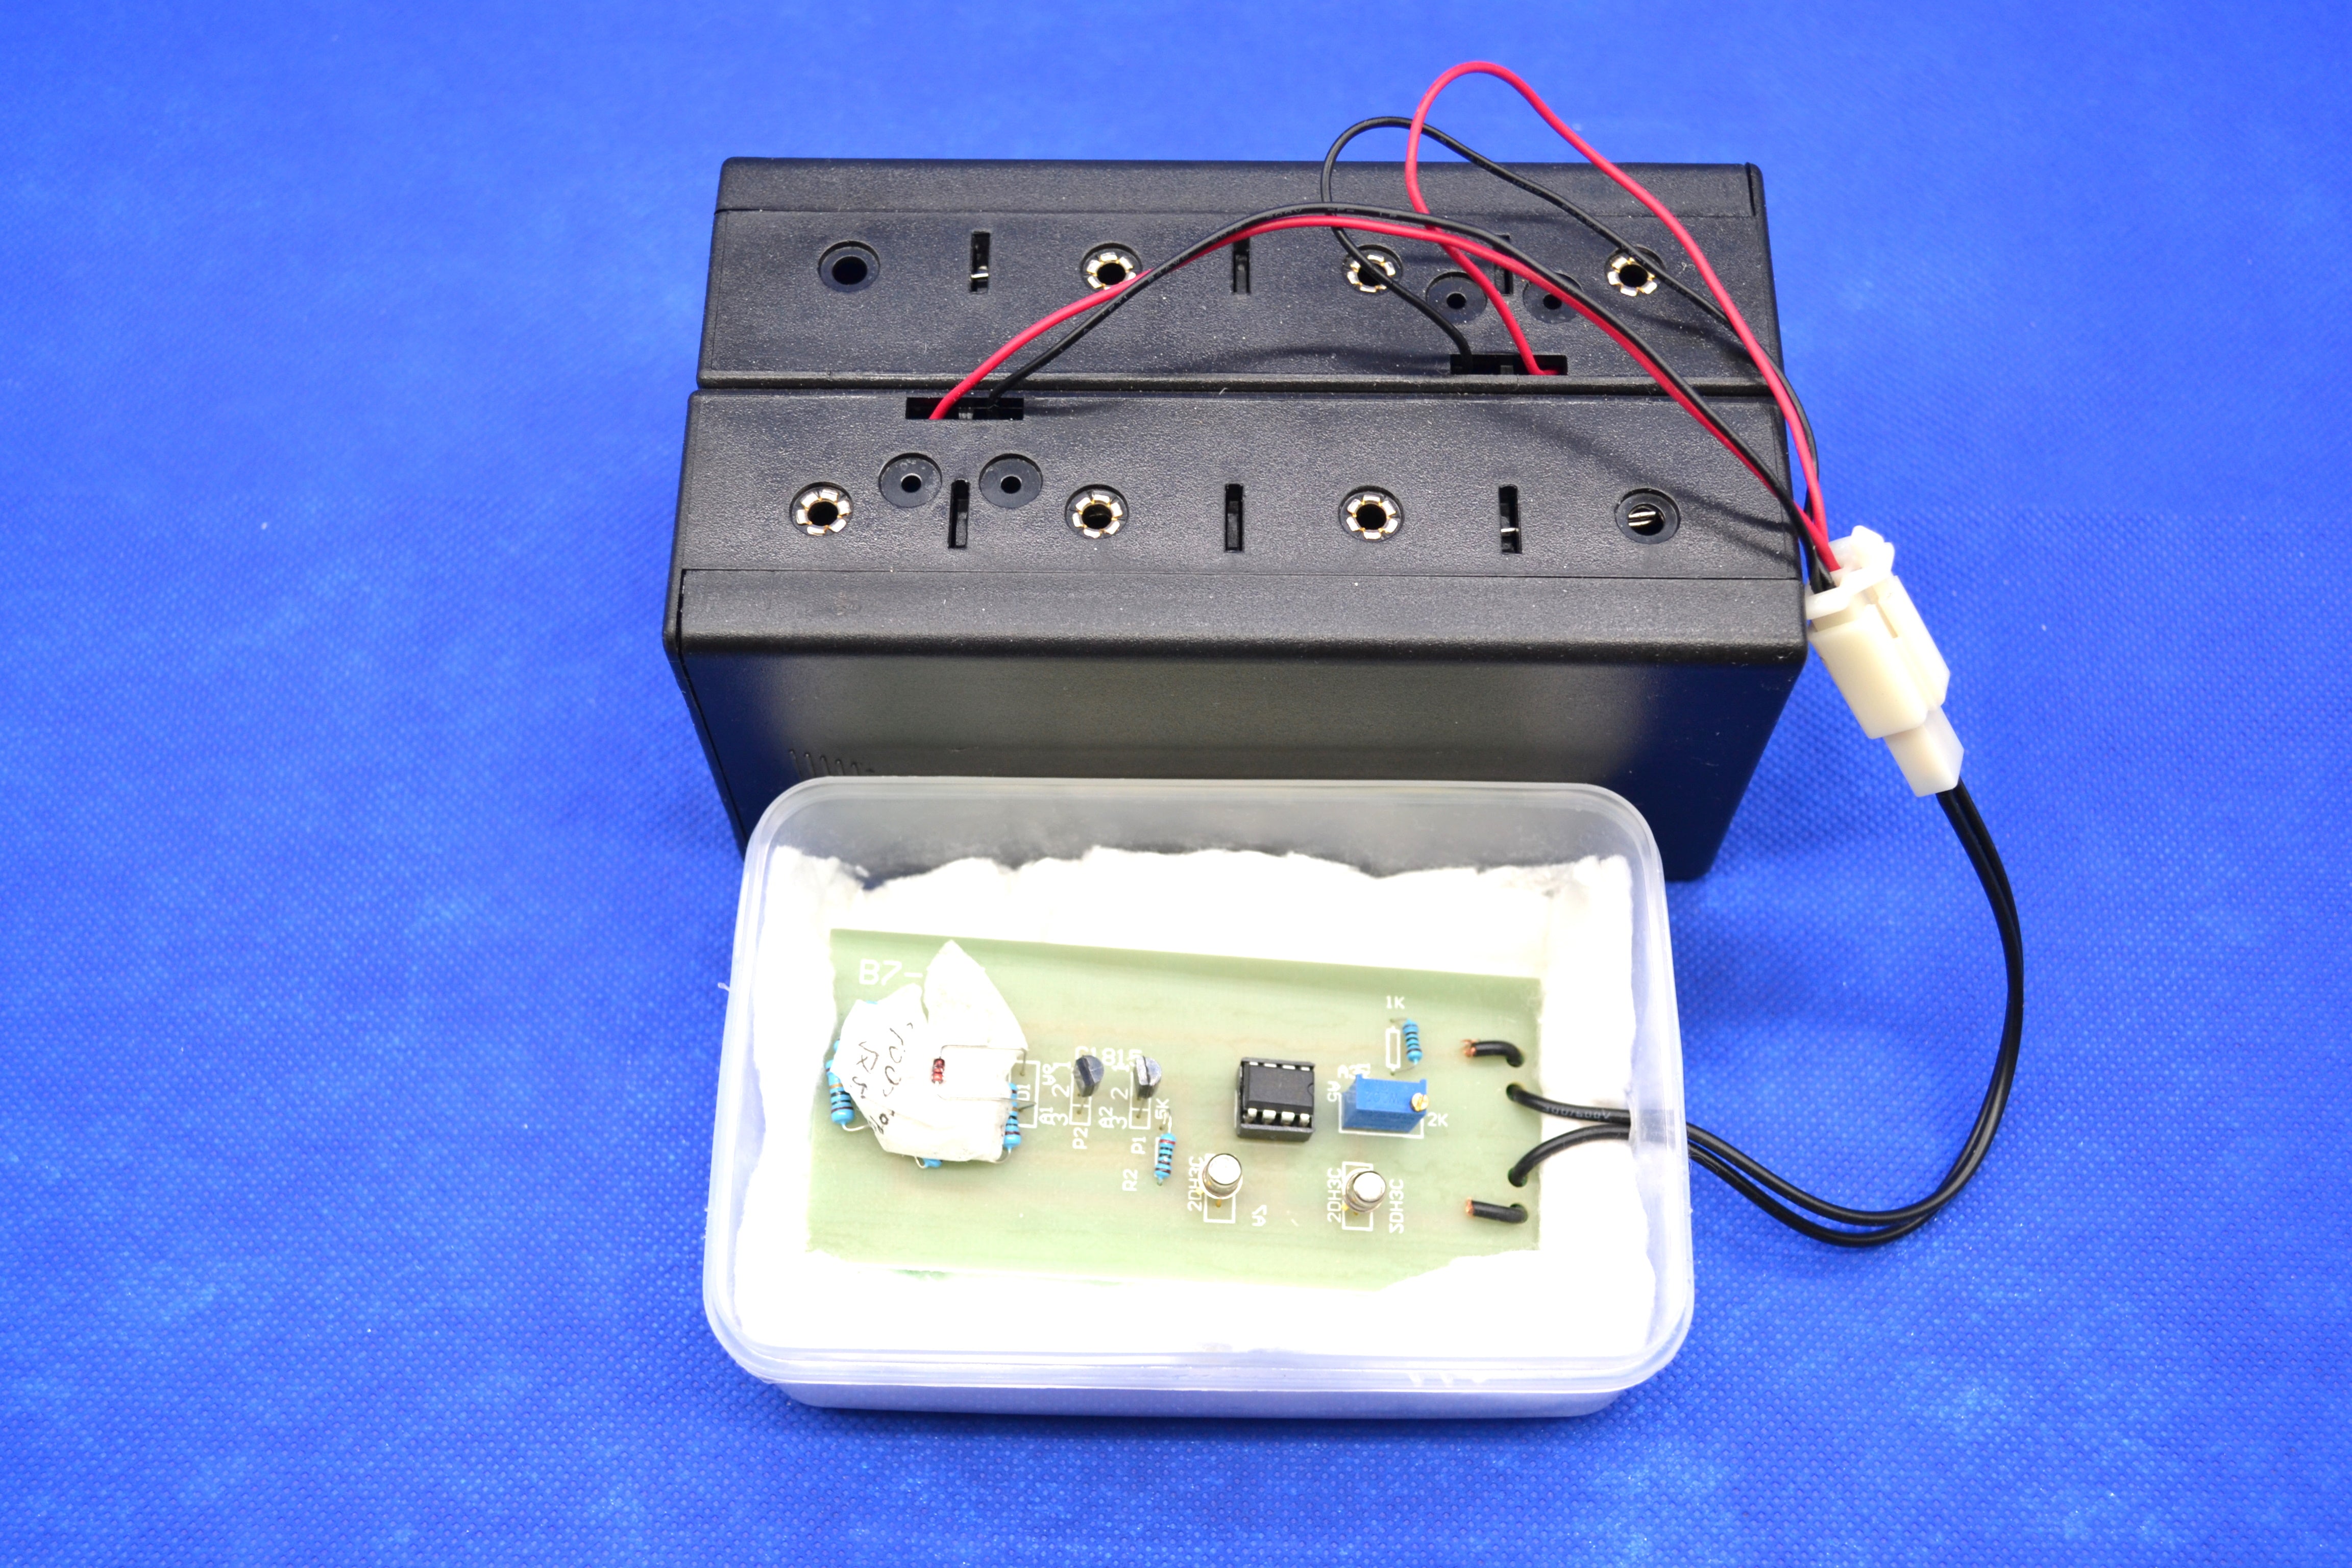 Battery thermal box for shipping and storage of BaTiO3 crystal substrates